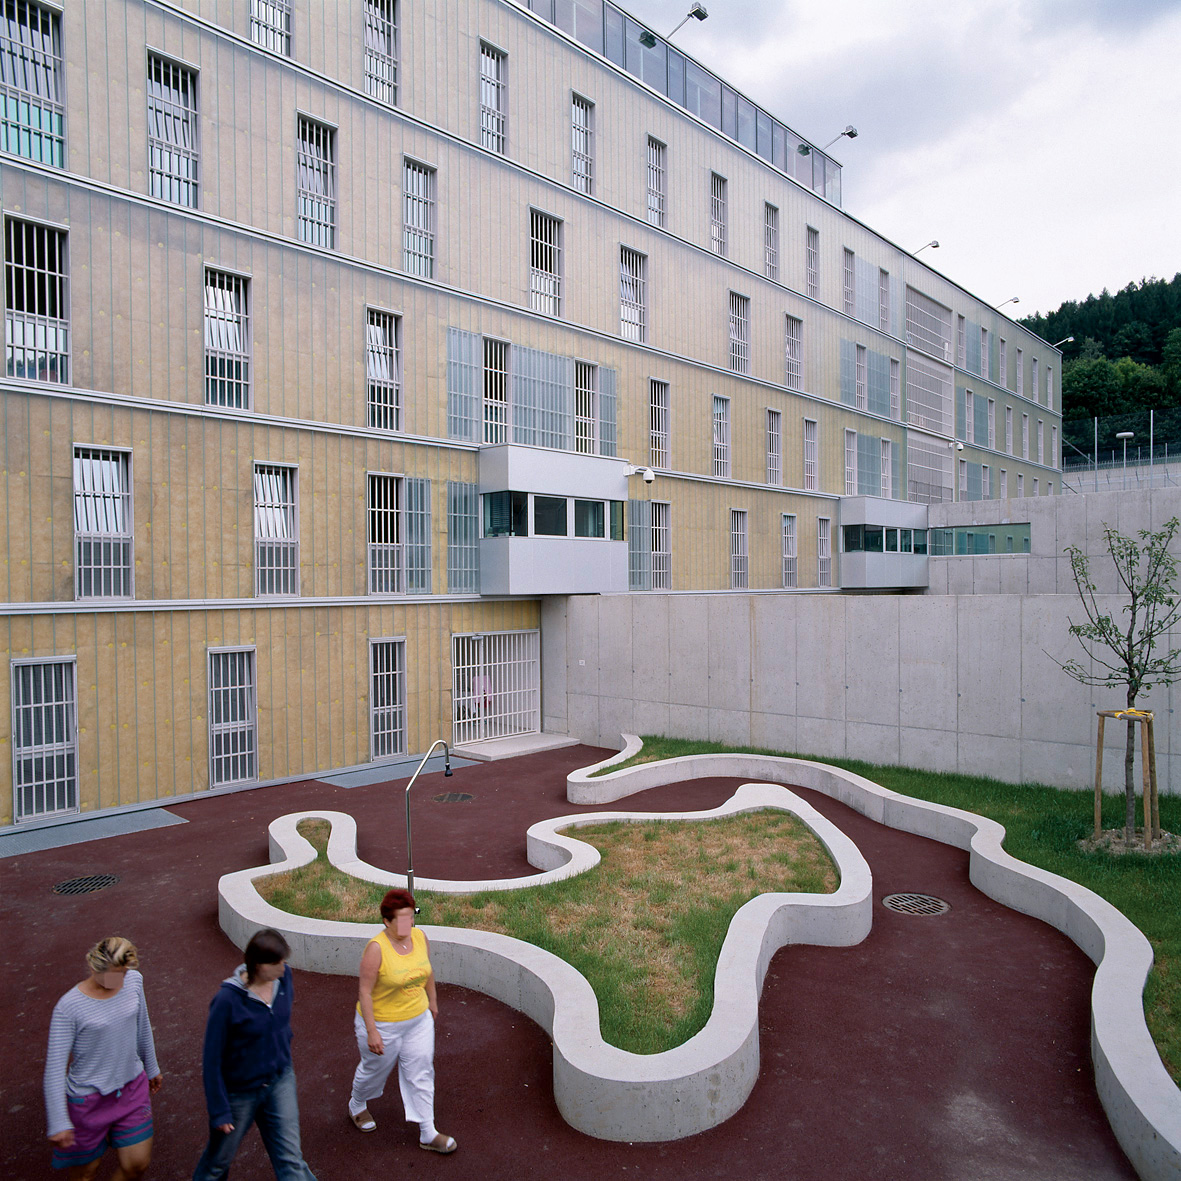 Prison, Architecture and Social Growth: Prison as an Active Component